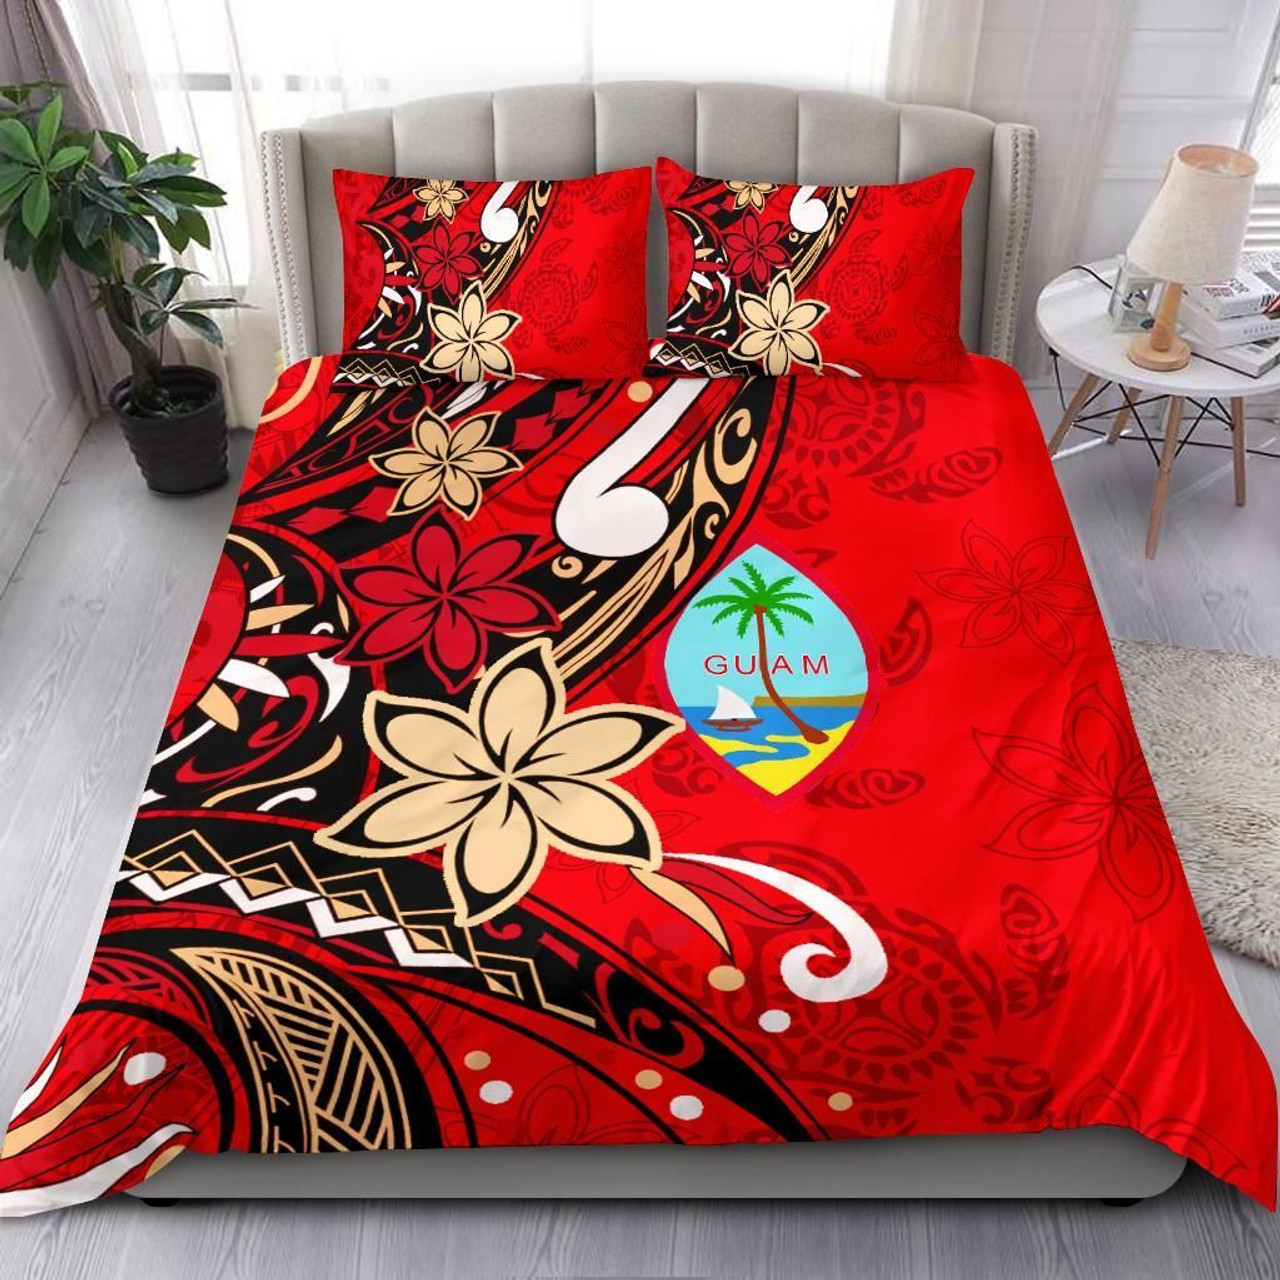 Guam Bedding Set - Tribal Flower With Special Turtles Red Color 2